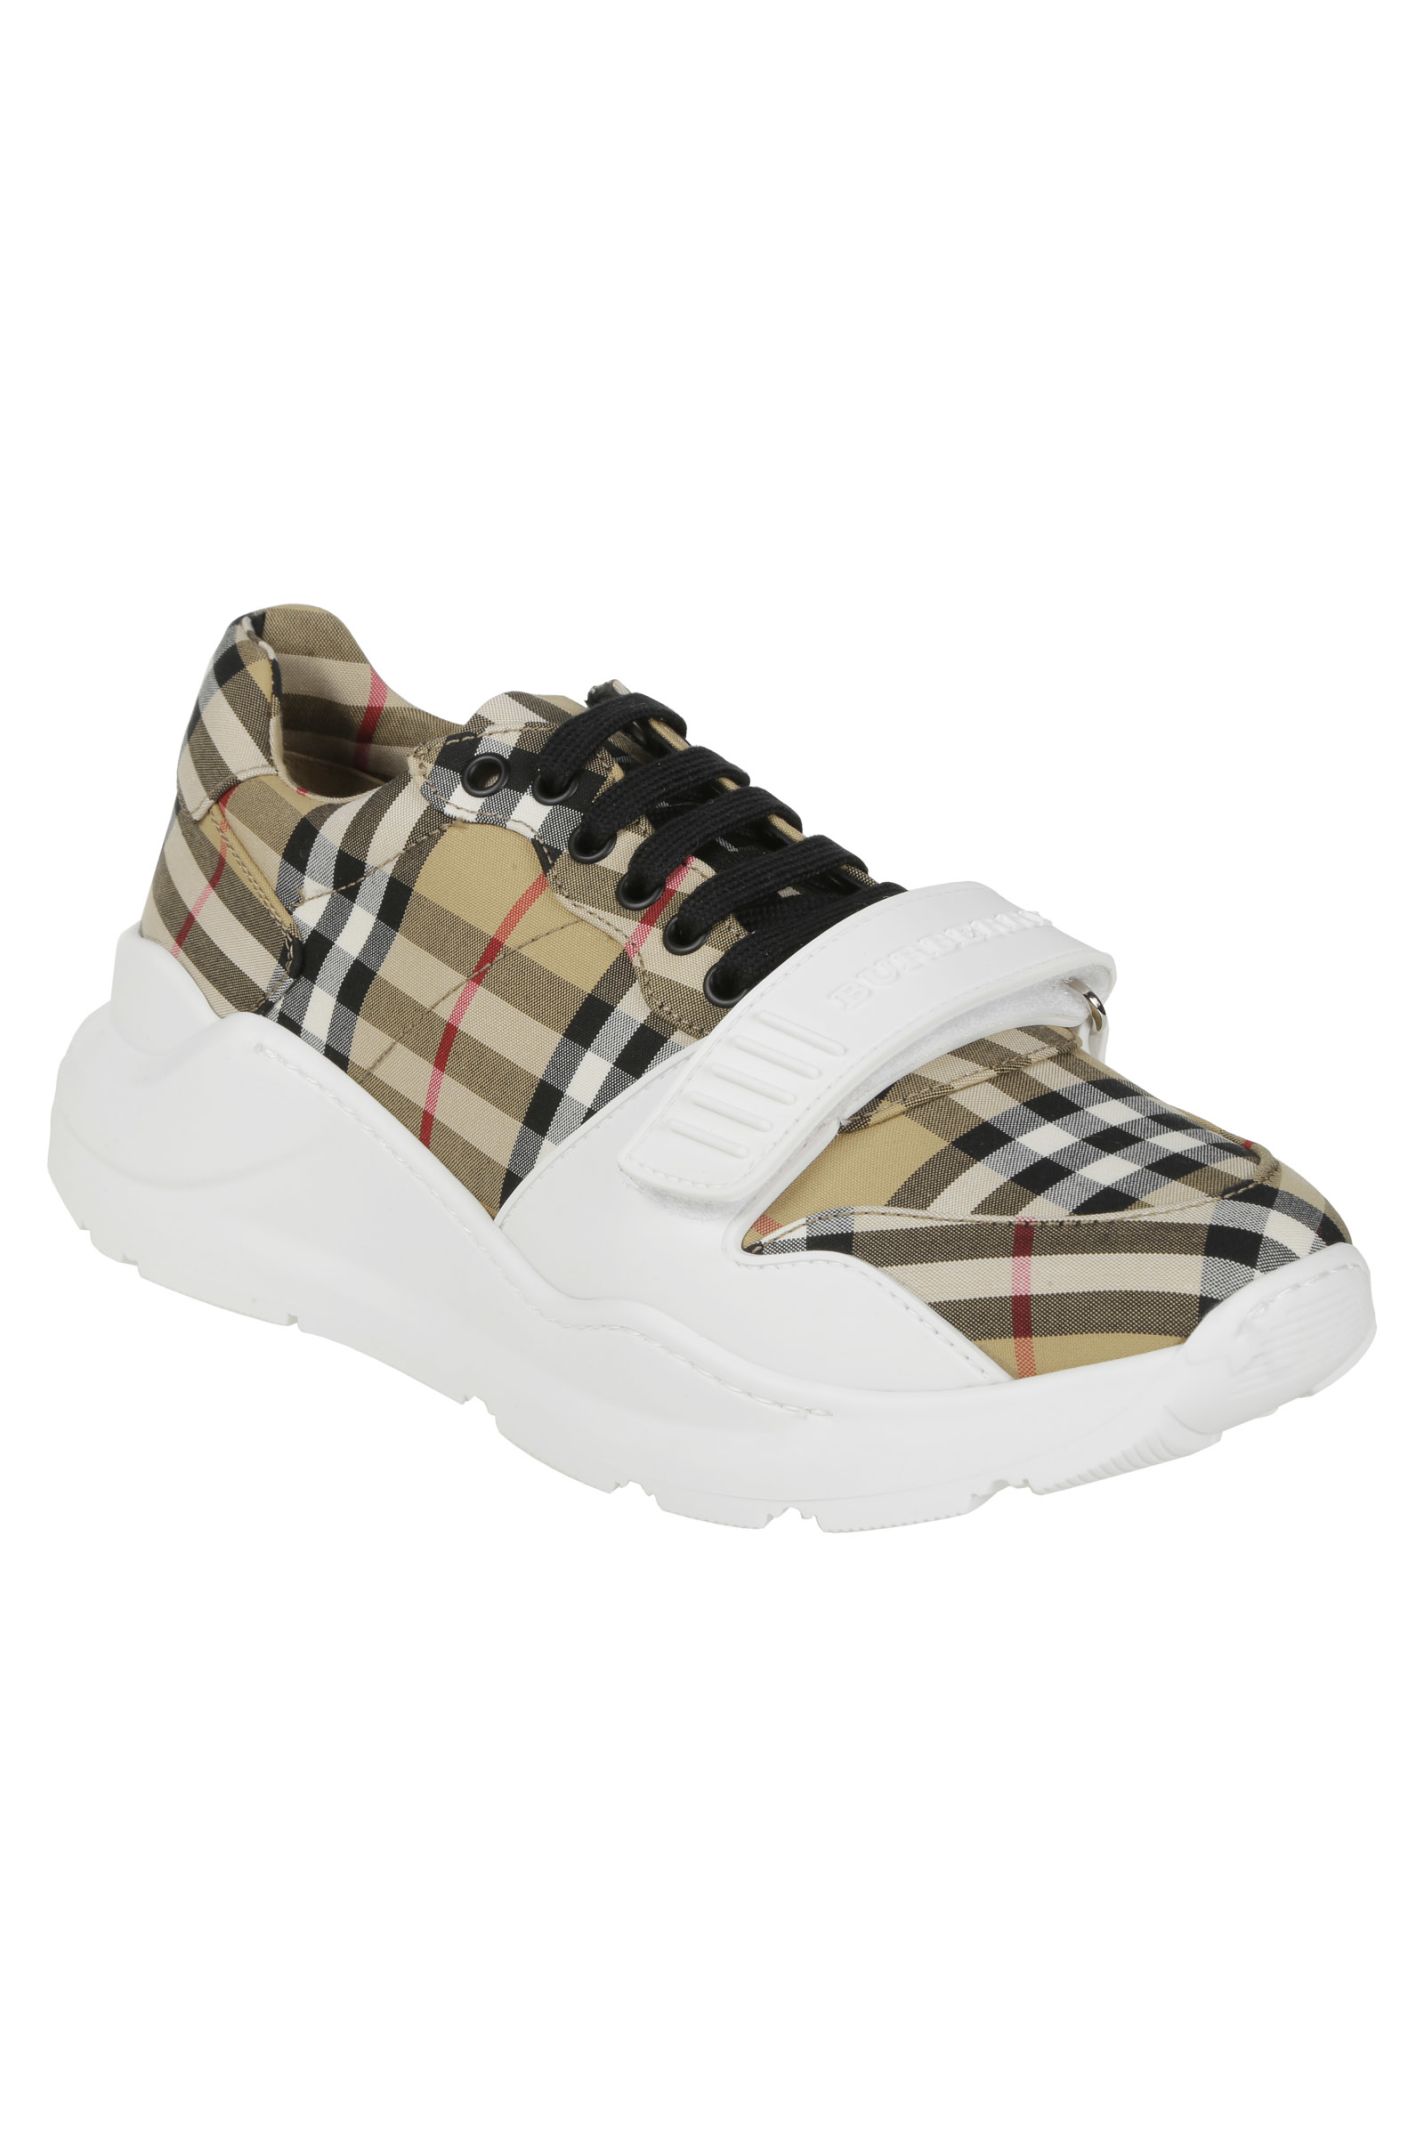 Burberry Burberry Checked Sneakers - Basic - 10834307 | italist